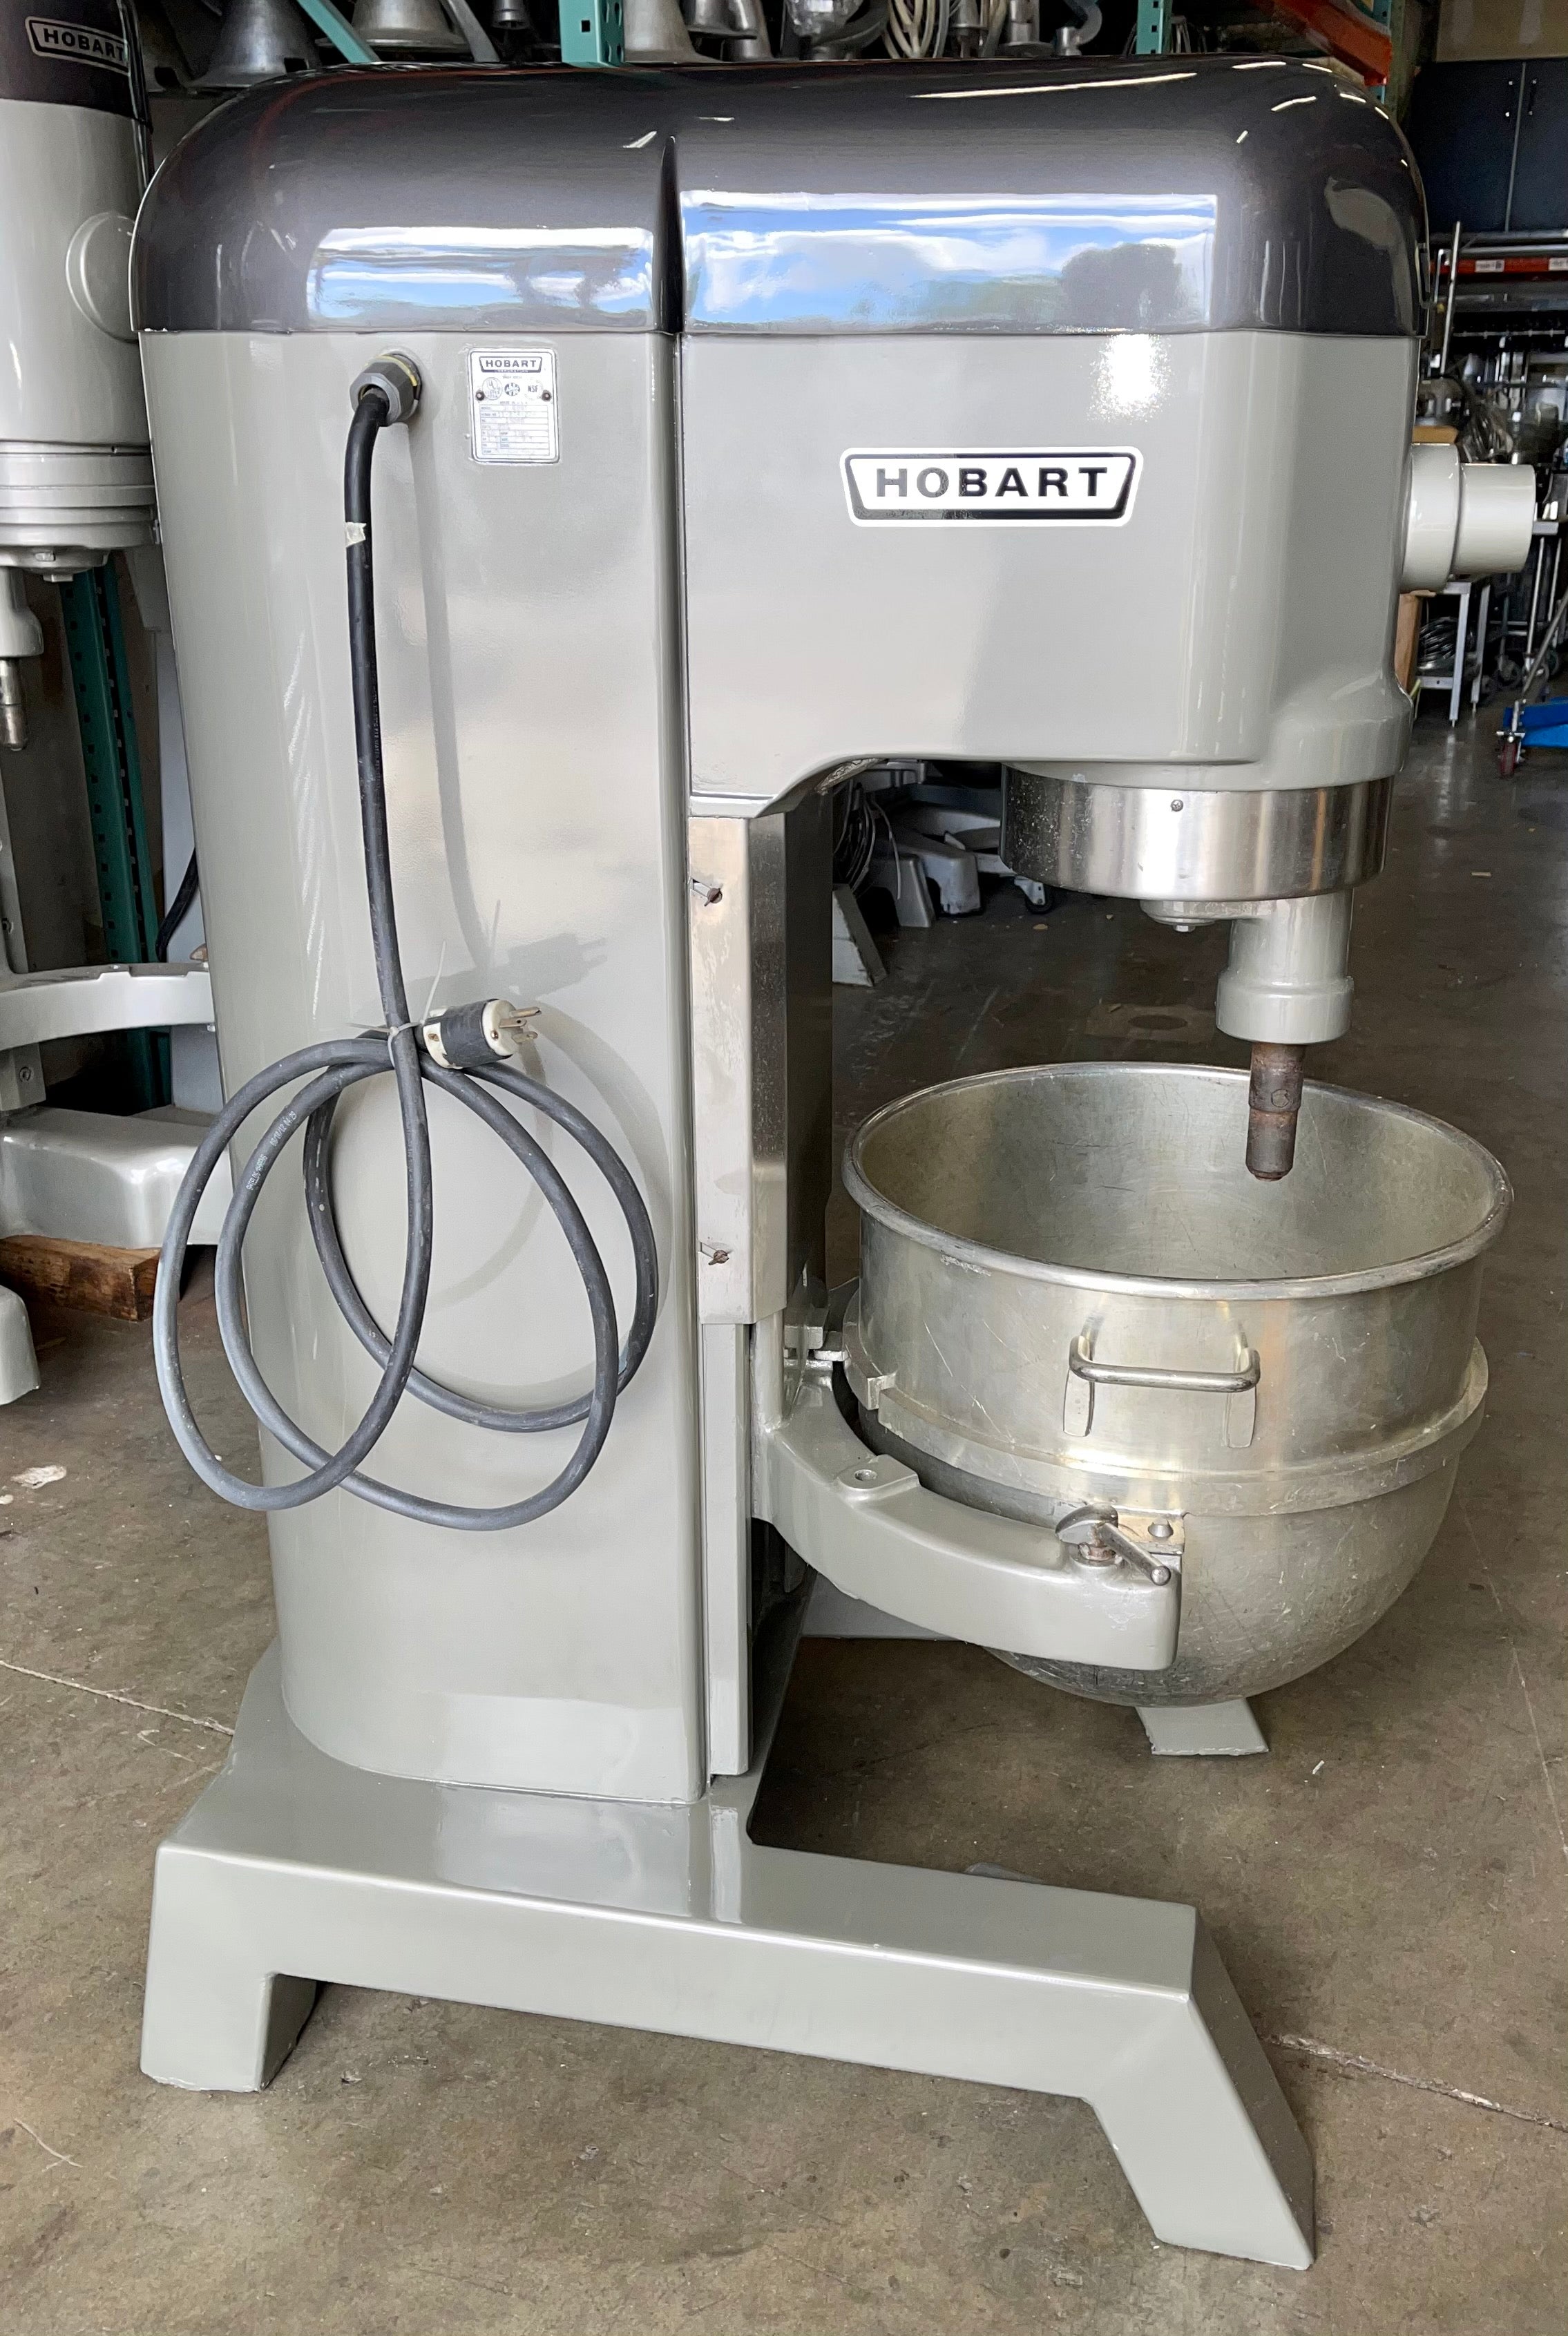 Hobart 1 phase H600 60 qt mixer comes with stainless steel bowl and one attachment